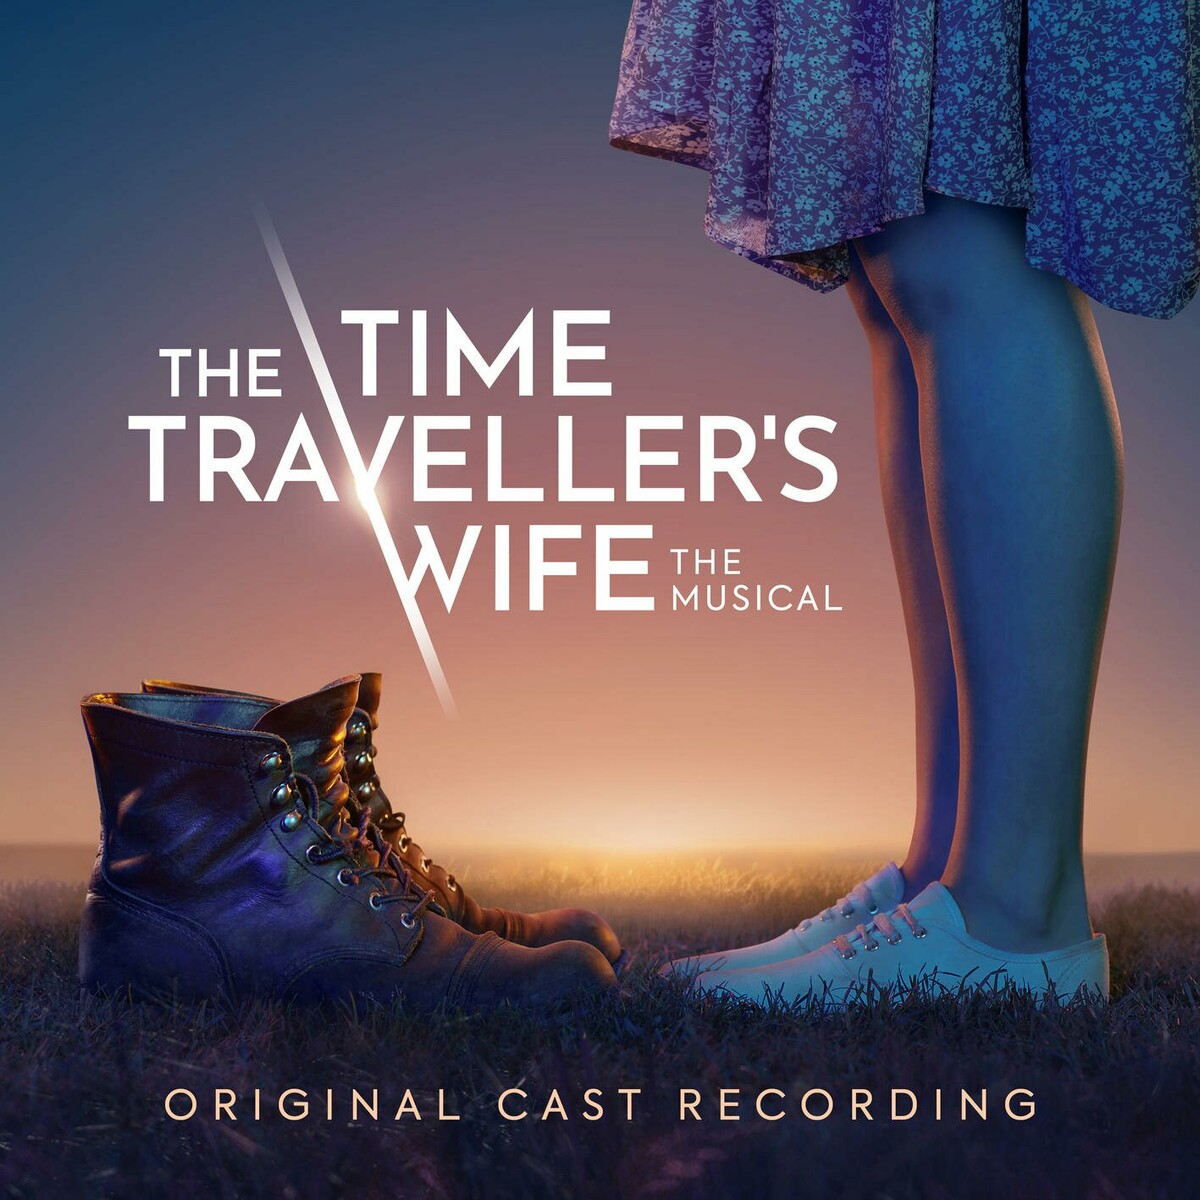 The Time Traveller’s Wife The Musical (Original Cast Recording) -- Seeders: 4 -- Leechers: 0